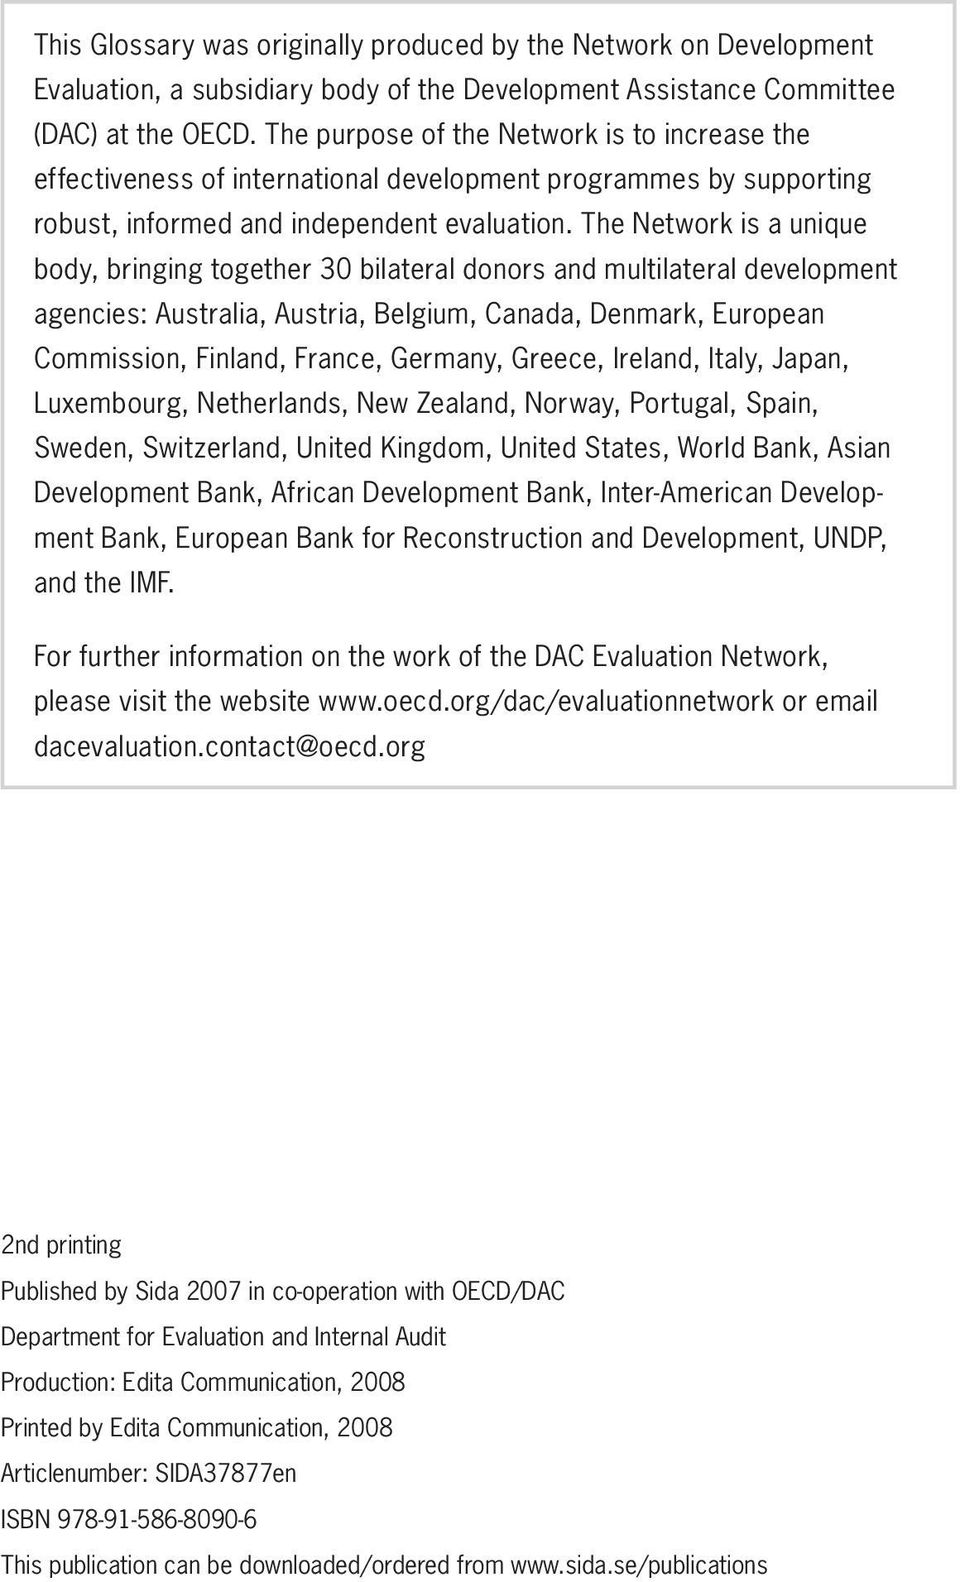 The Network is a unique body, bringing together 30 bilateral donors and multilateral development agencies: Australia, Austria, Belgium, Canada, Denmark, European Commission, Finland, France, Germany,